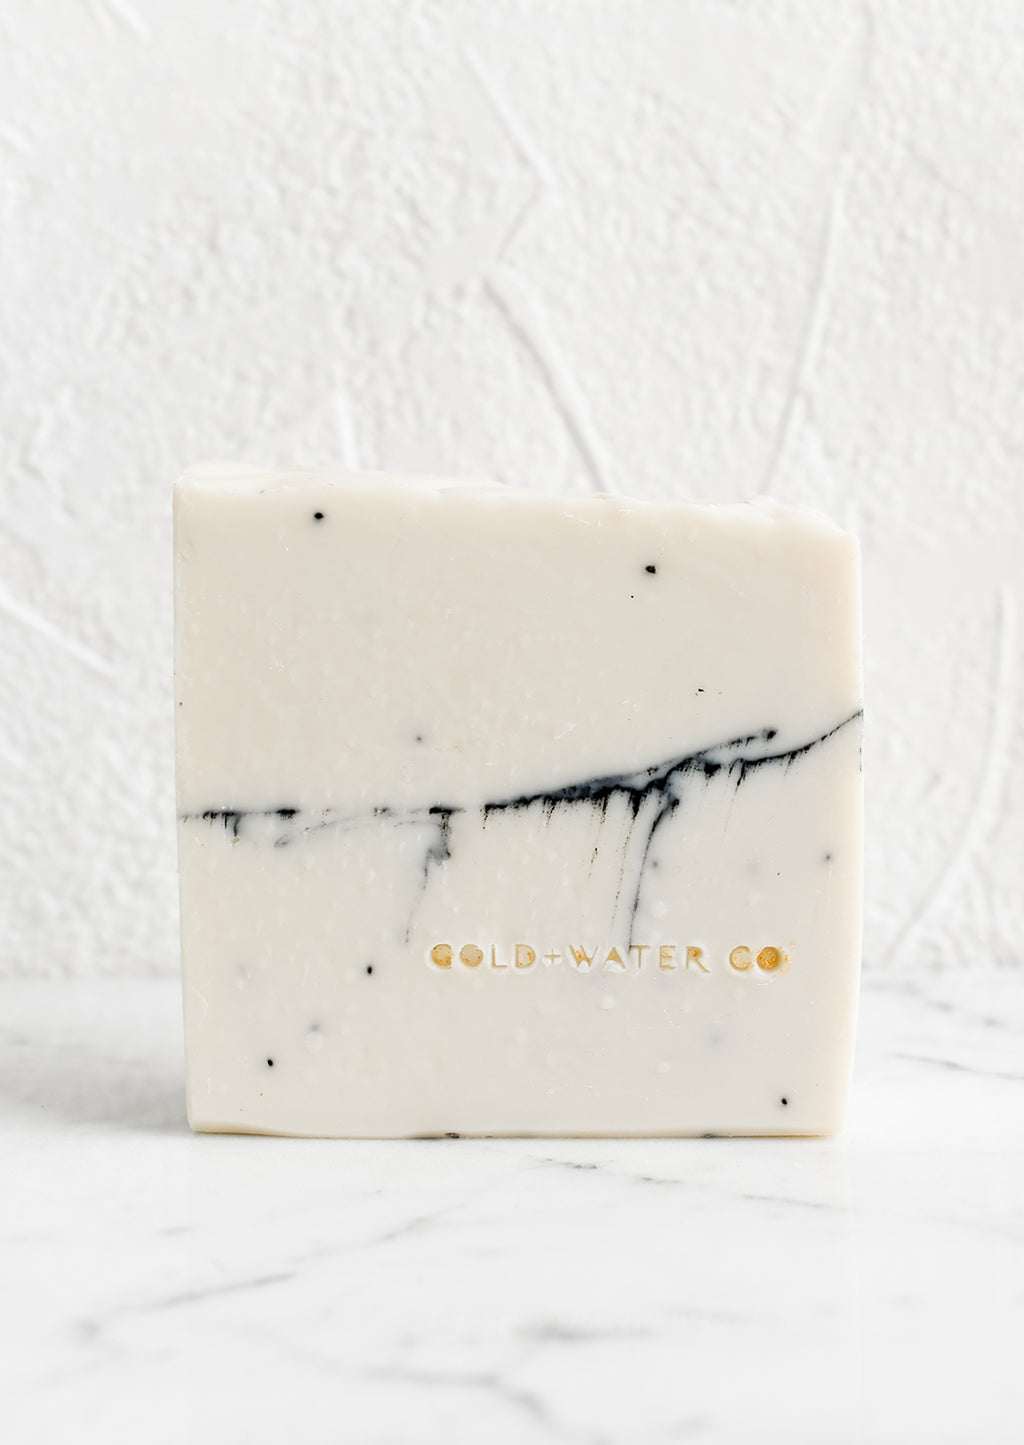 Mon Coeur: A white bar of soap with brand stamp at corner.